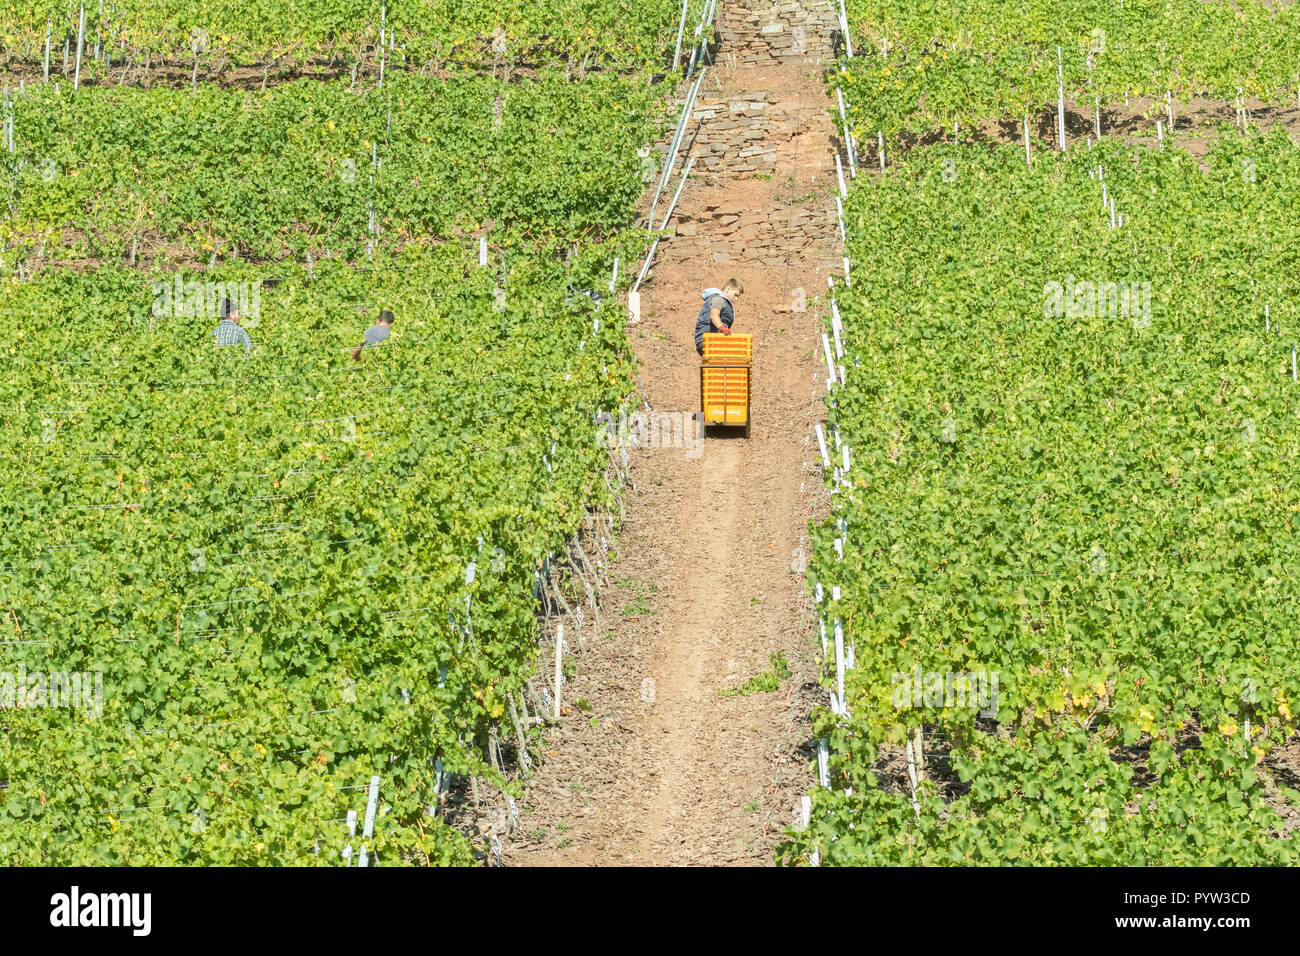 a man pulls crates up a steeply sloping Moselle Valley vineyard during harvesting using a pulley system, Germany, Europe Stock Photo